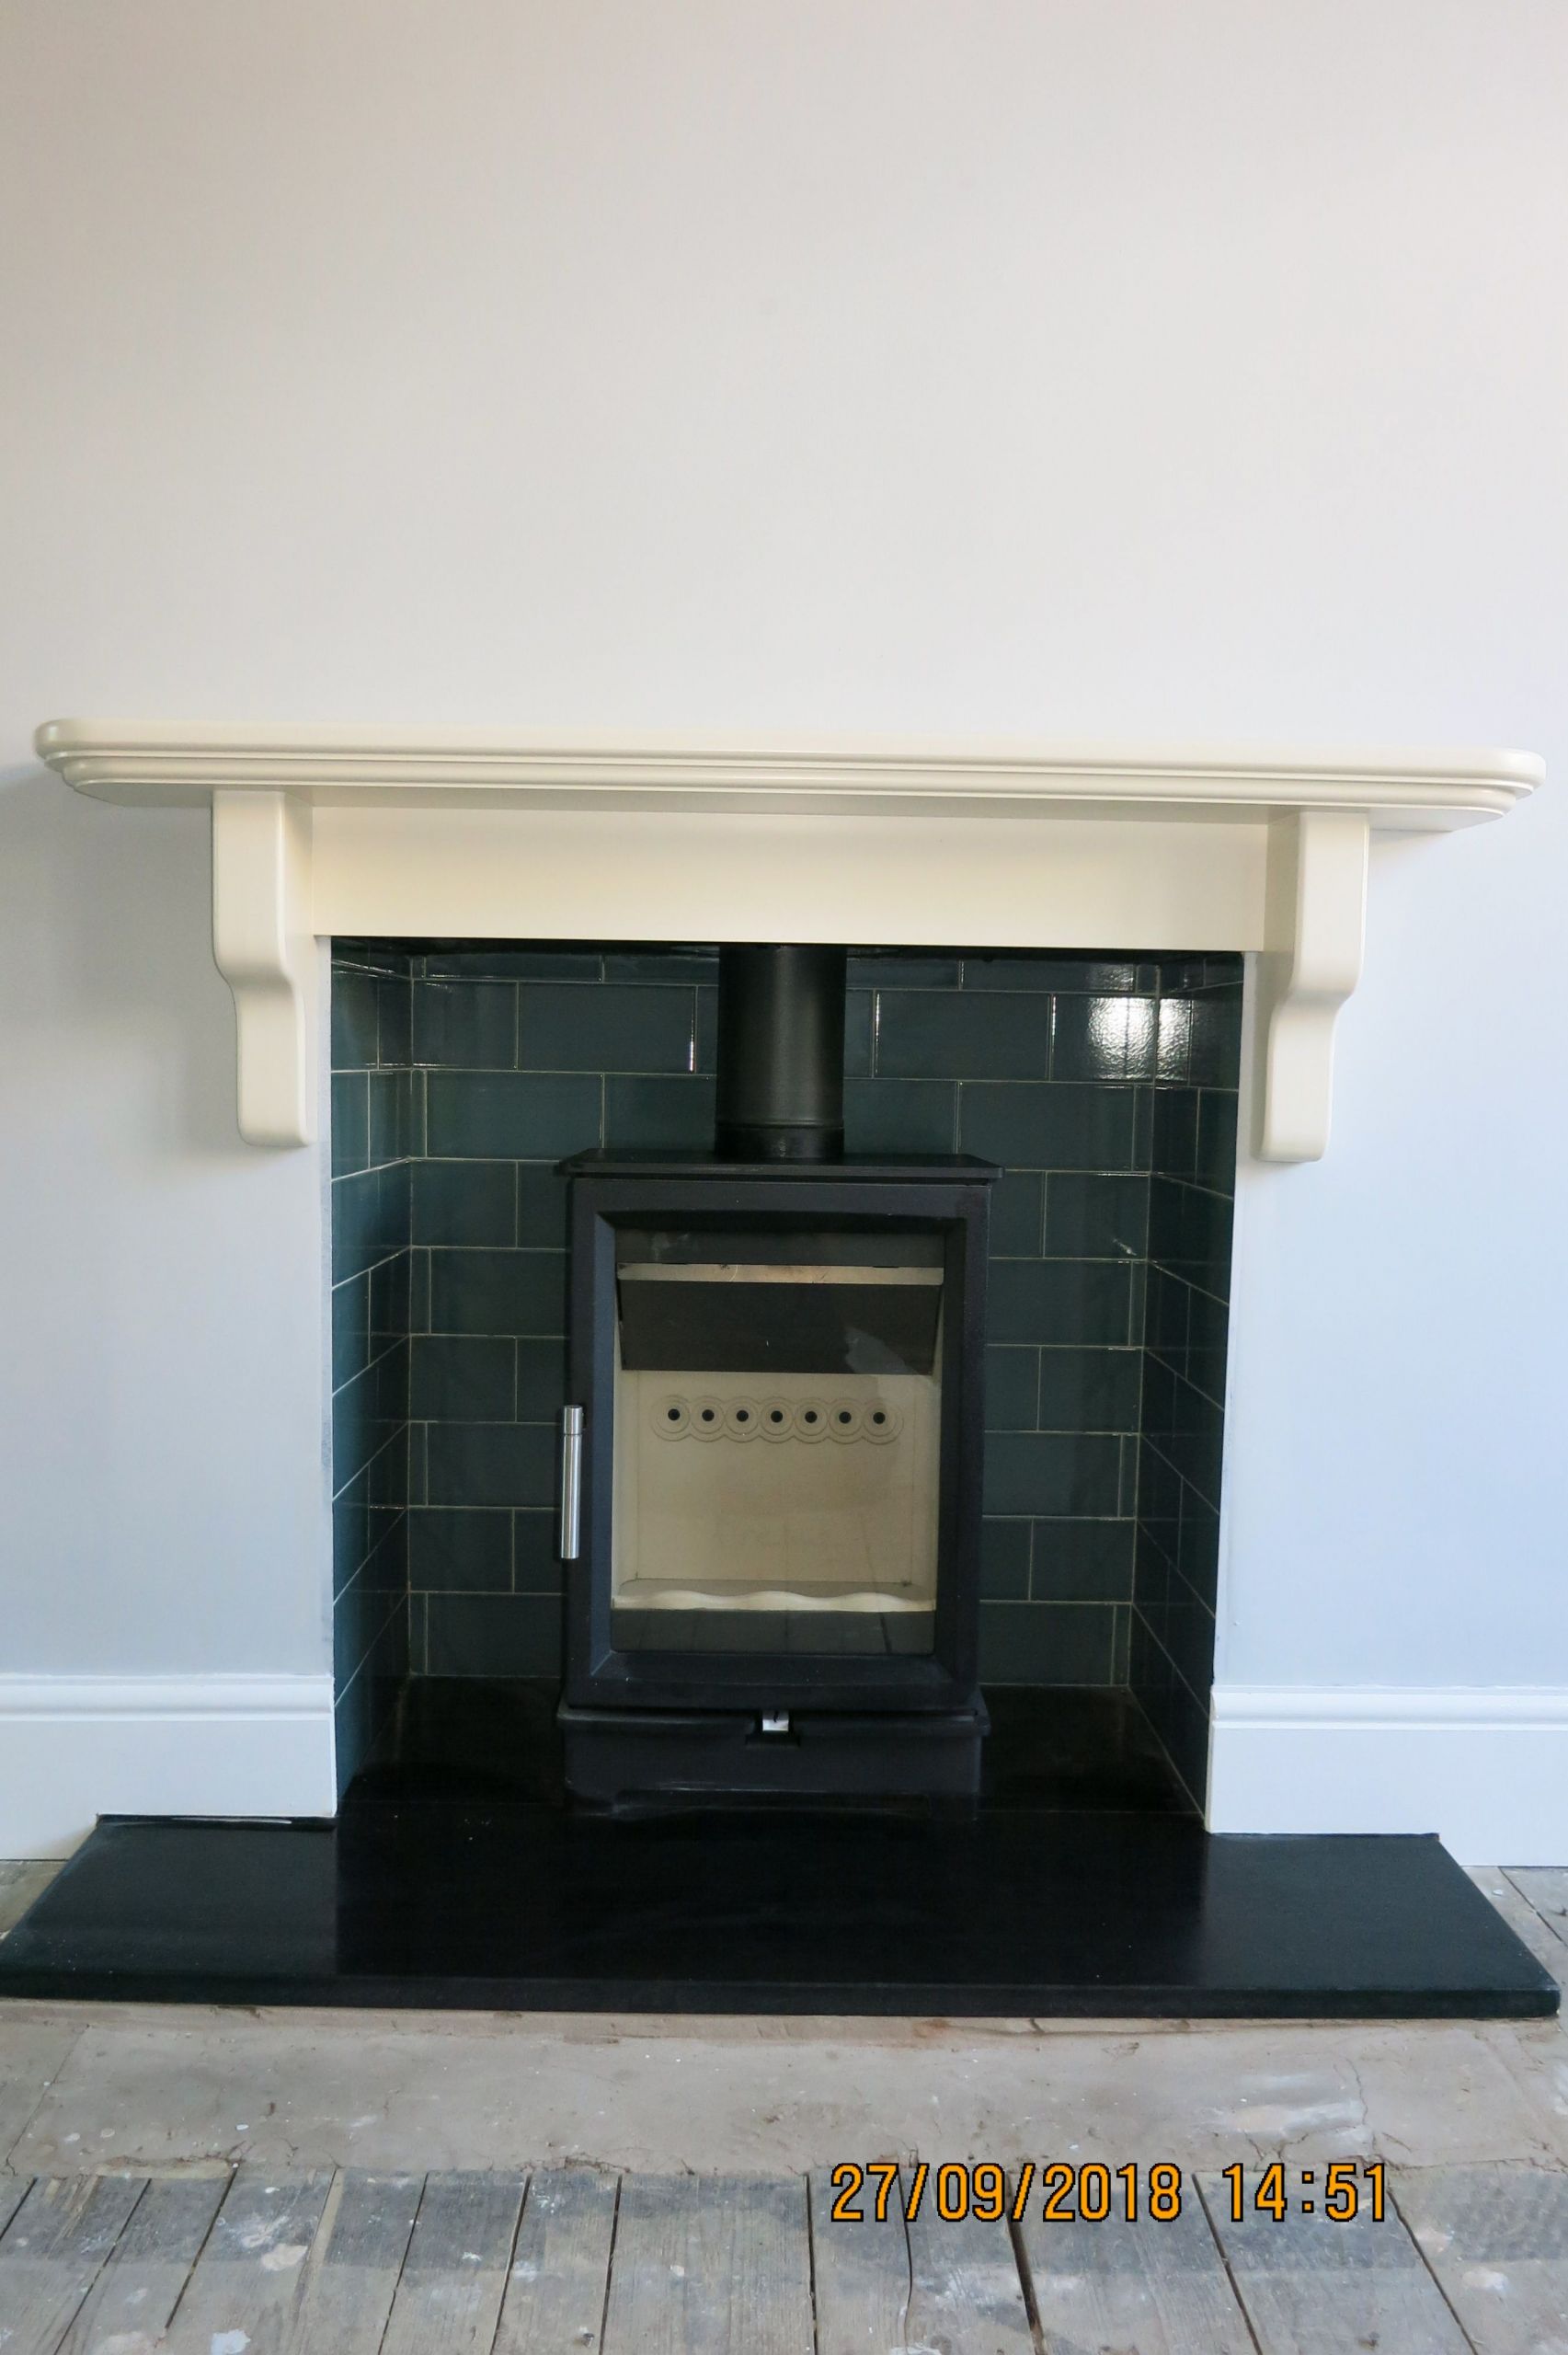 Gas Fireplace Insert Ideas Inspirational How Nice is This A Woodtec 5kw Wood Burning Stove Green